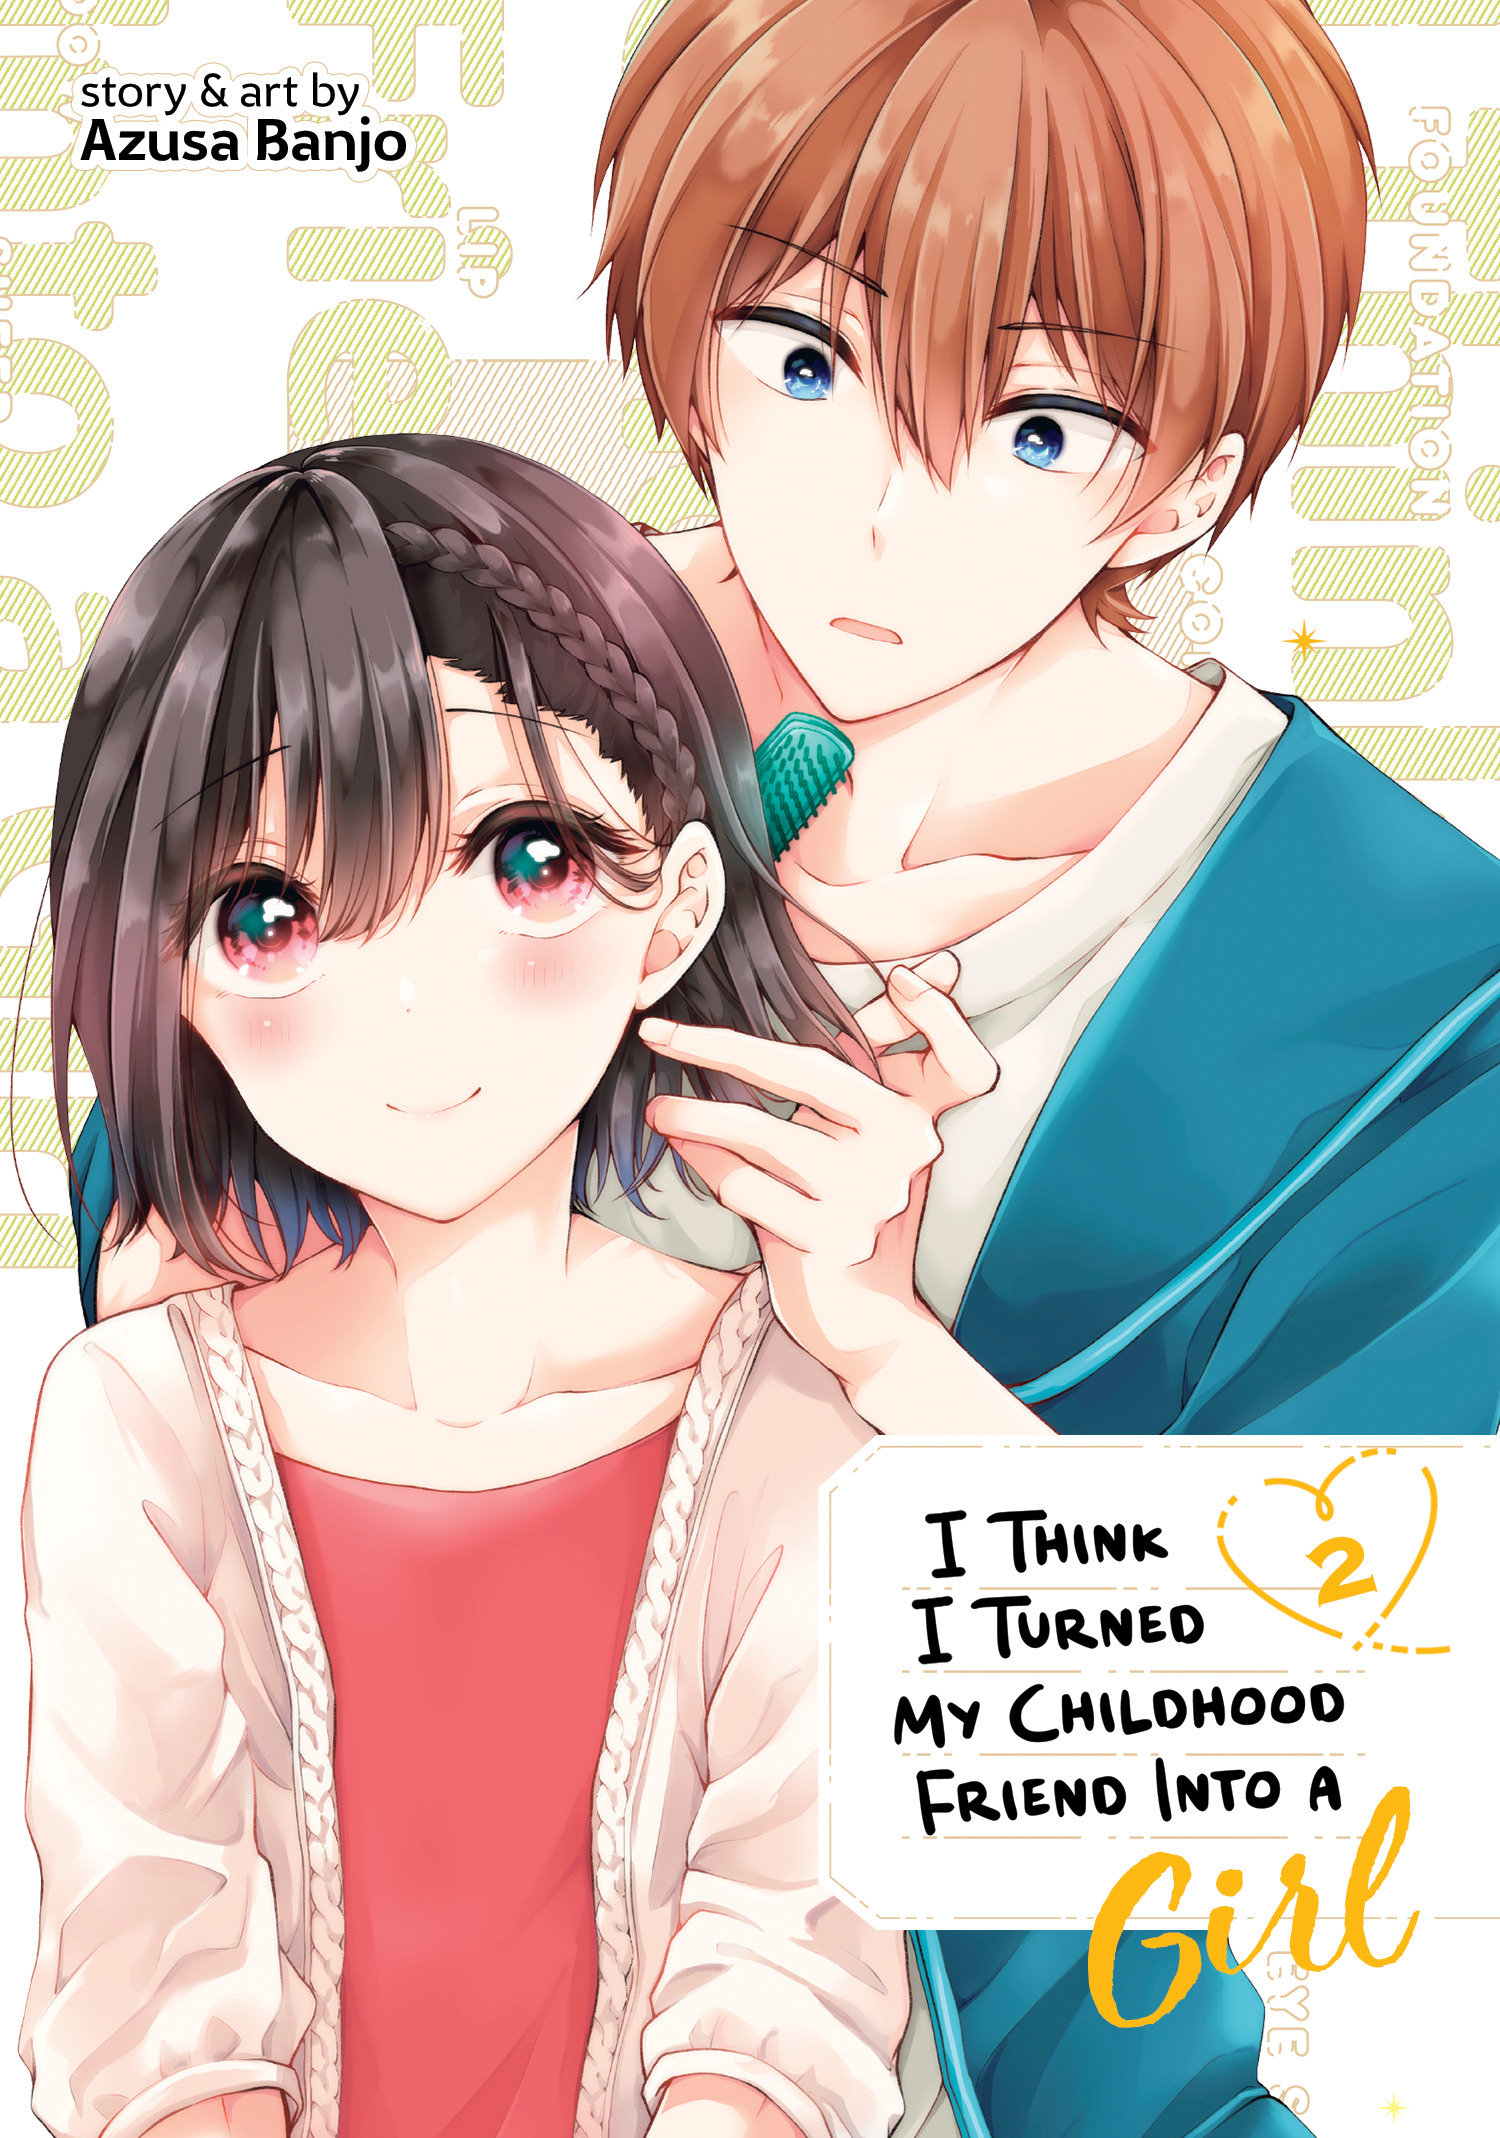 The Girl I Saved on the Train Turned Out to be My Childhood Friend Manga Volume 2